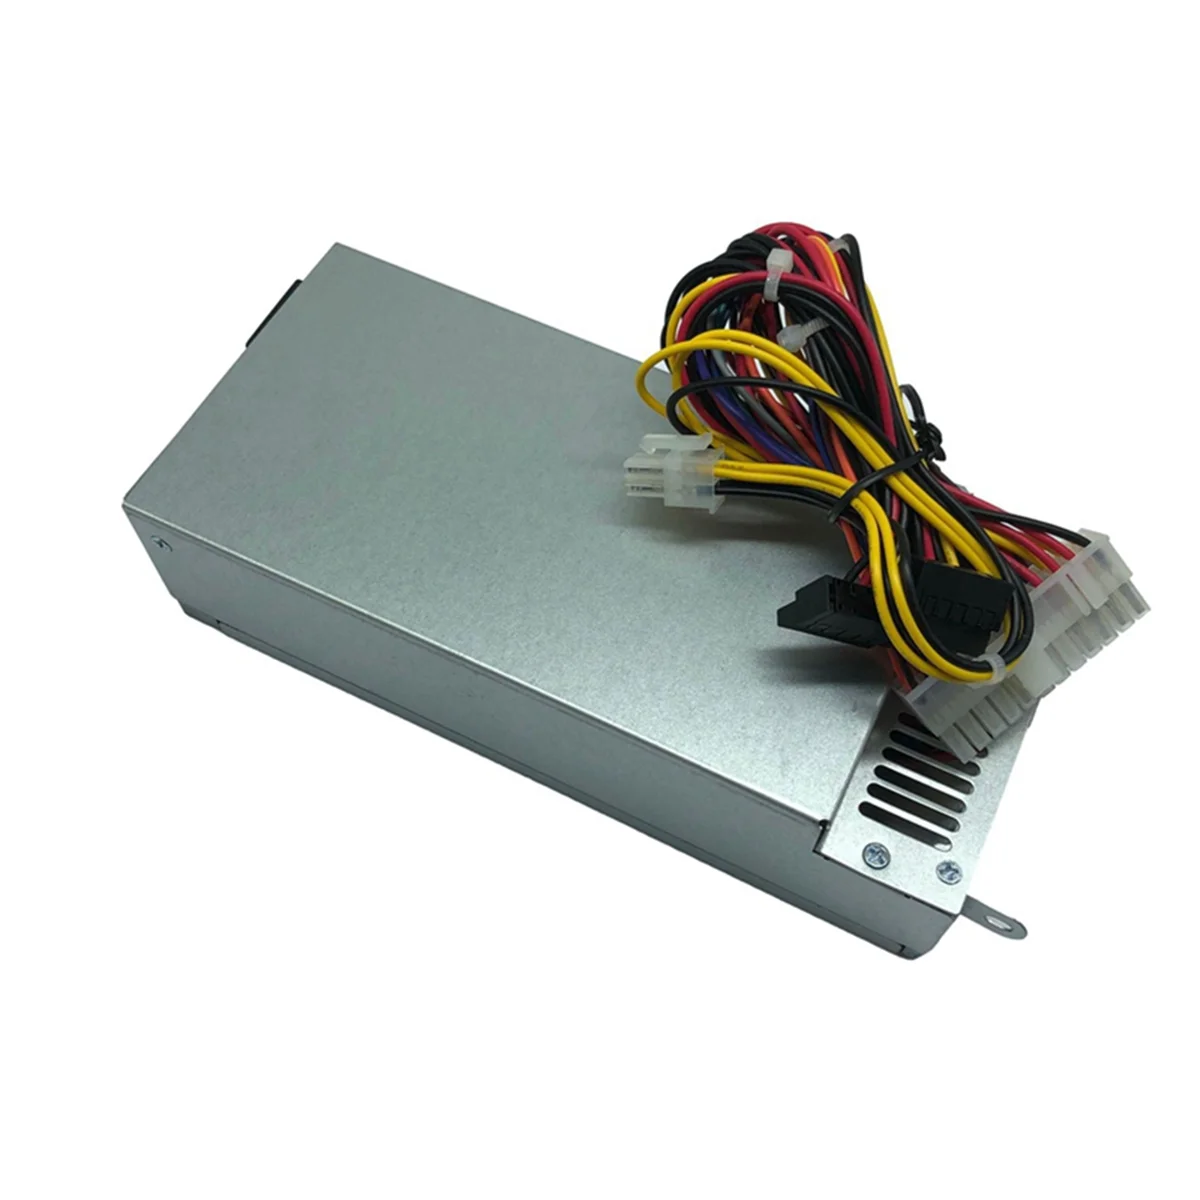 

PS-5221-9 Compatible with PE-5221-08 06 Rated 220W Mini Multi-Functional Convenient Easy to Use Chassis Power Supply